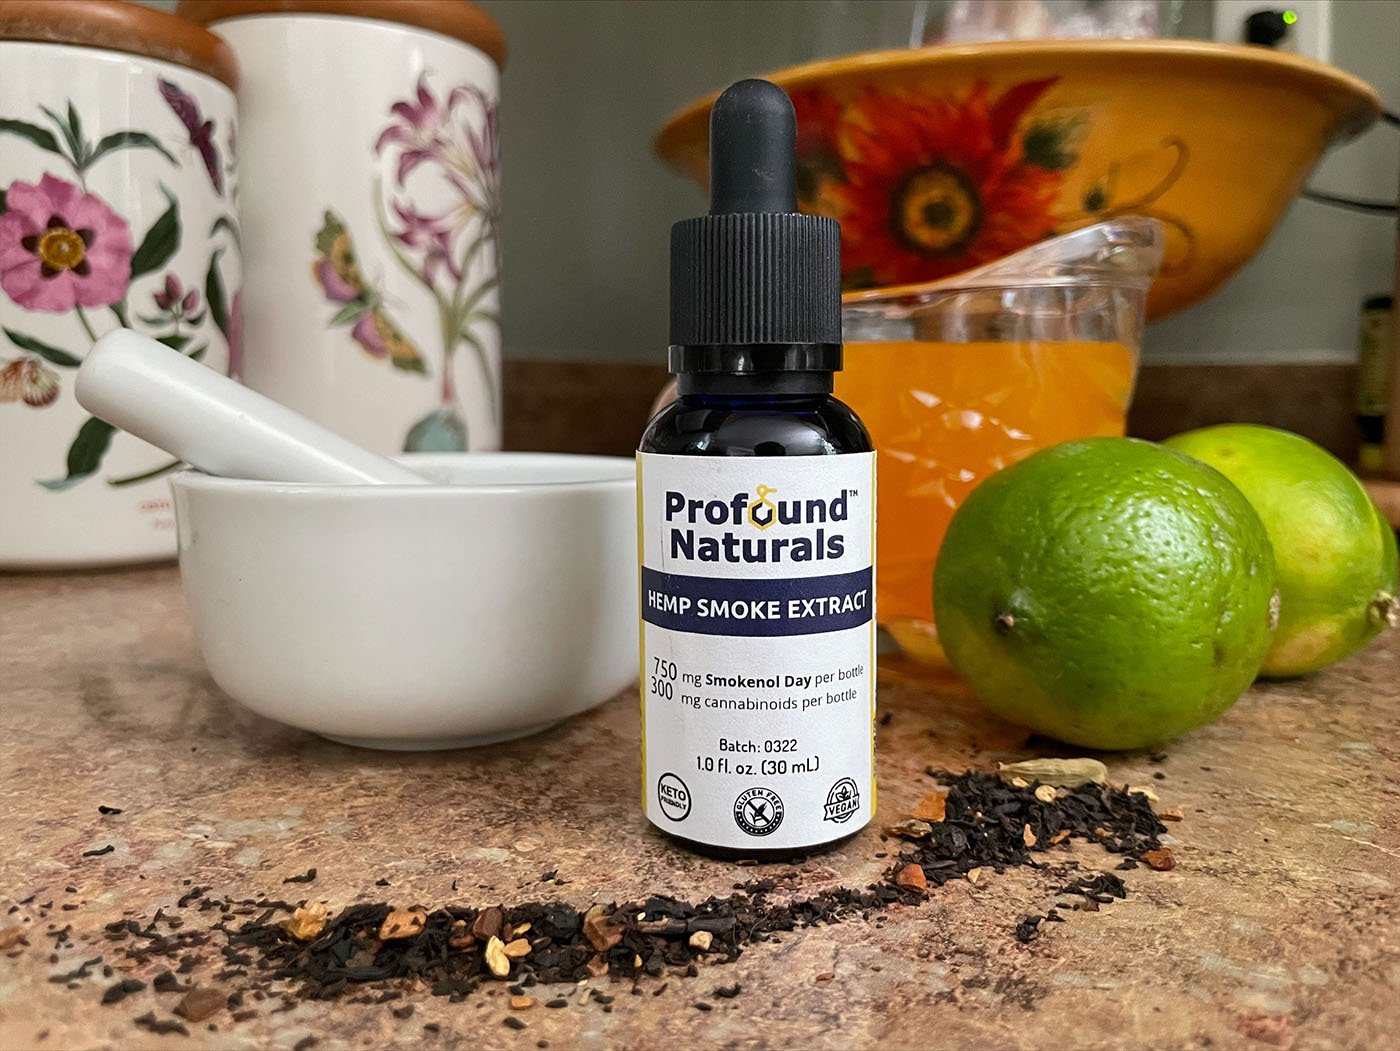 Profound Naturals CBD dropper on table with fruit and spices